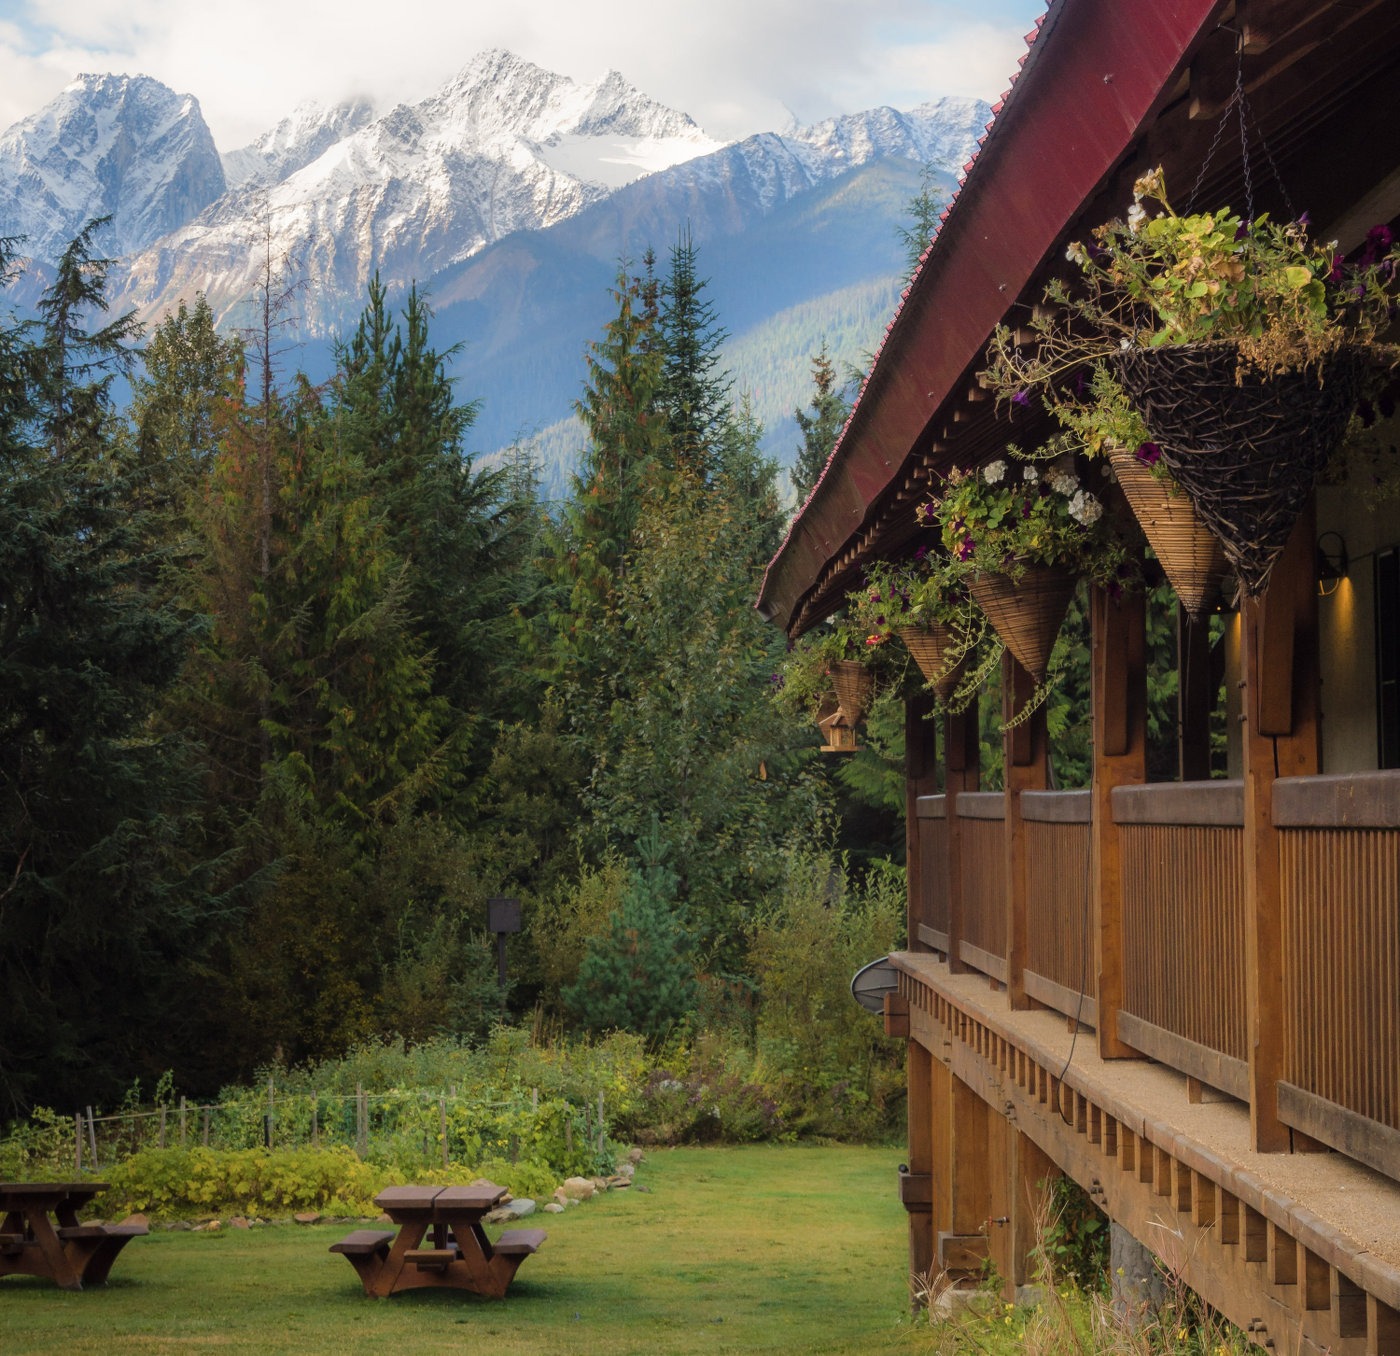 Side of the lodge with mountains in background and hanging flower pots